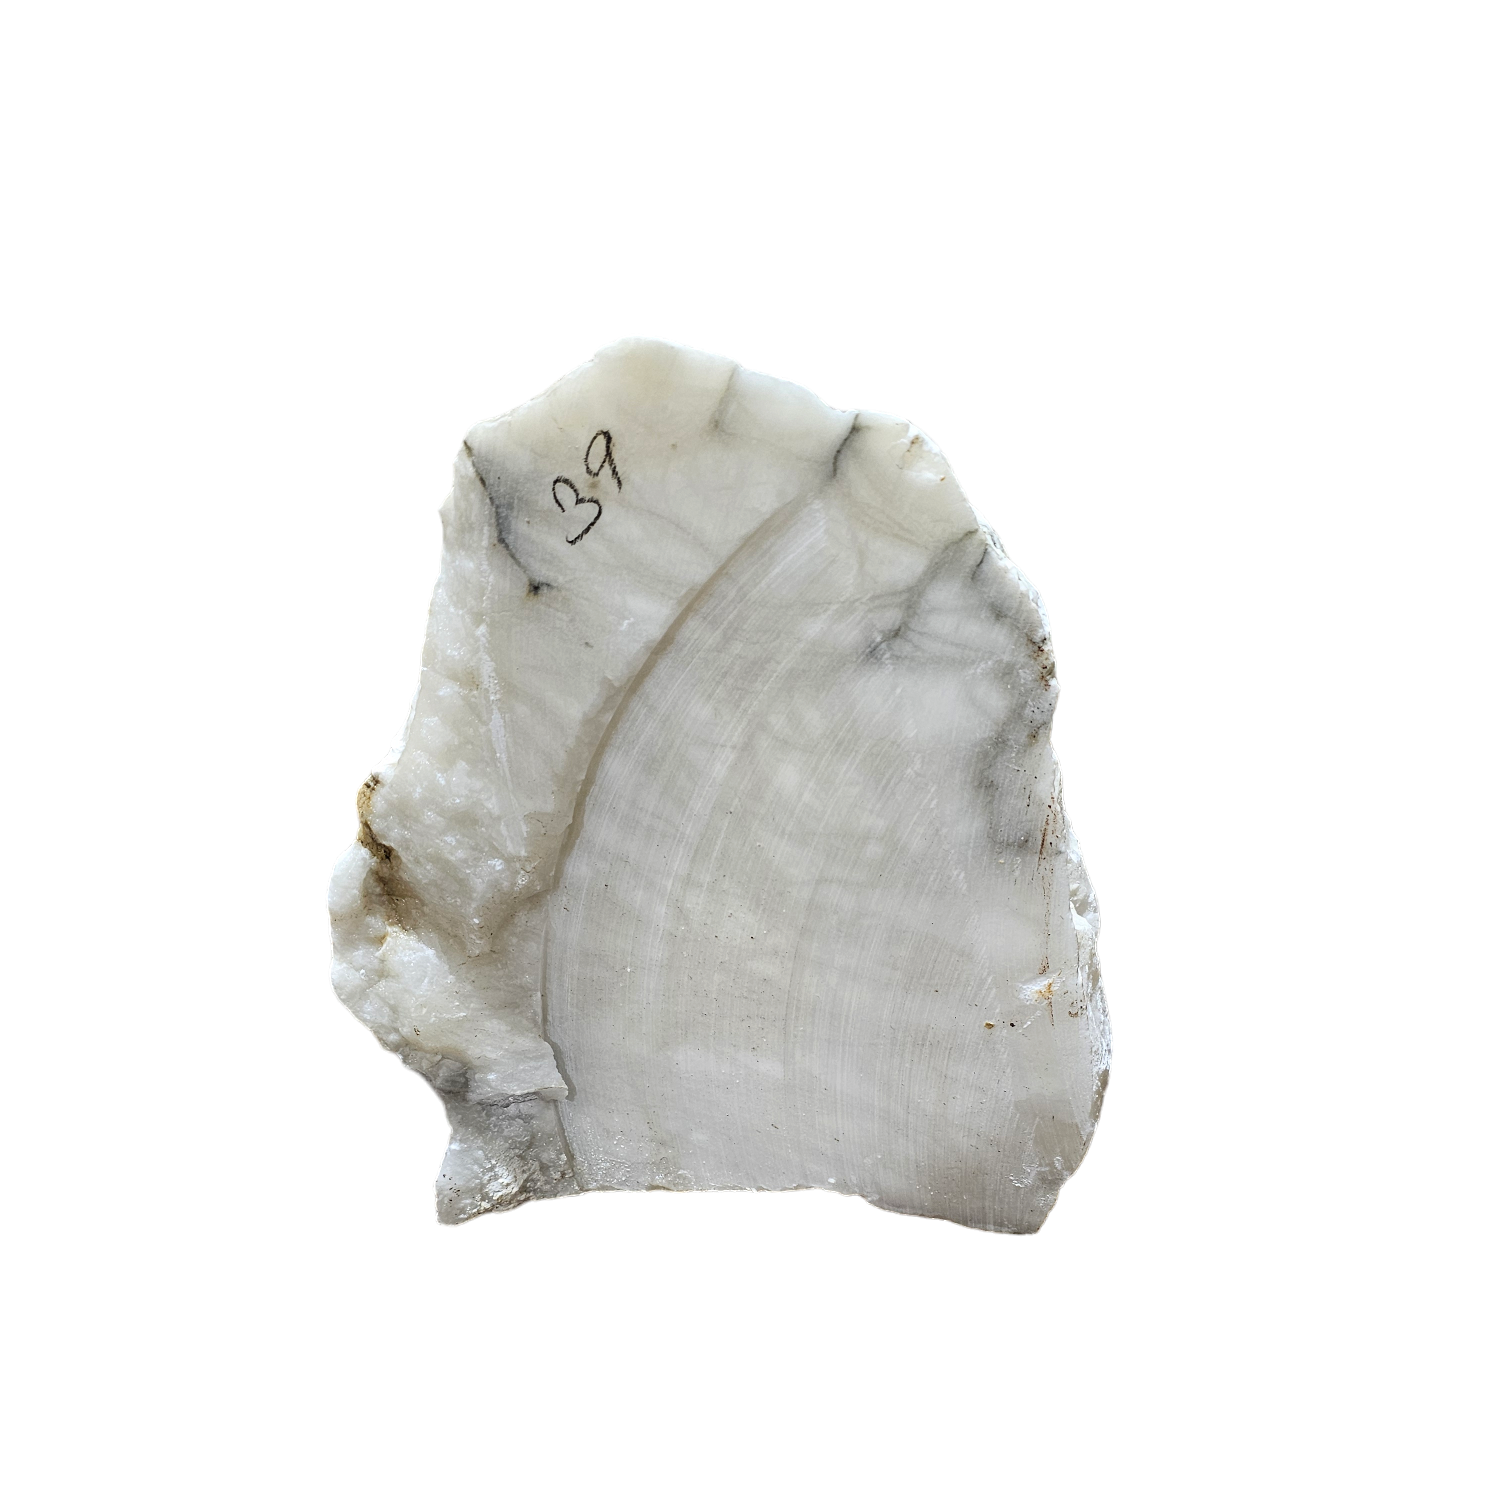 Oyster Shell Alabaster - US